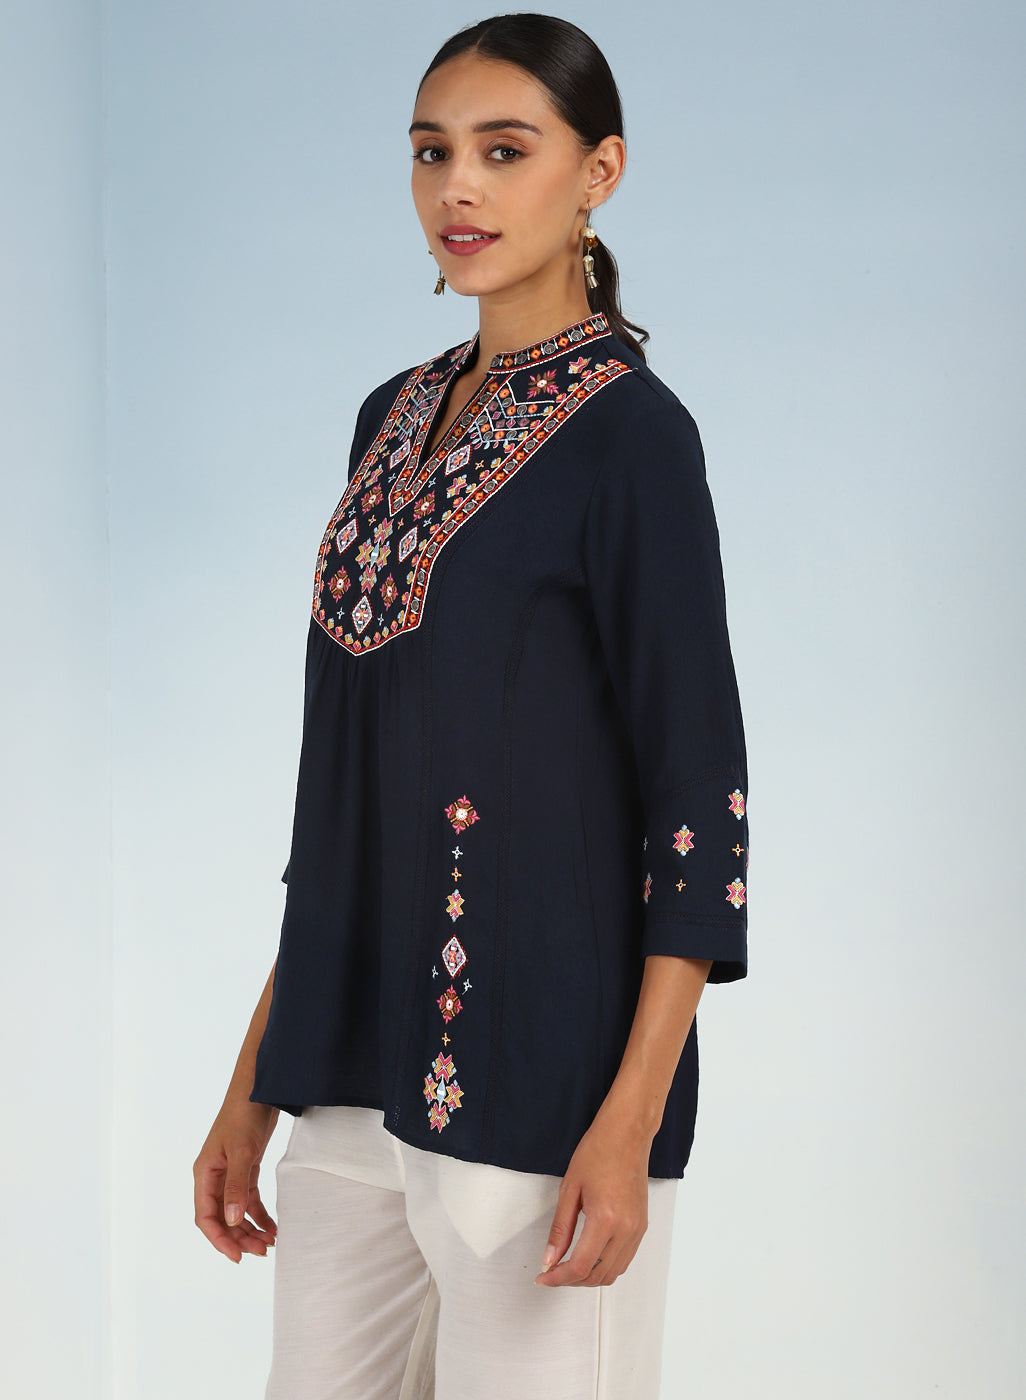 Navy Blue Tunic with Front Yoke Embroidery Detail